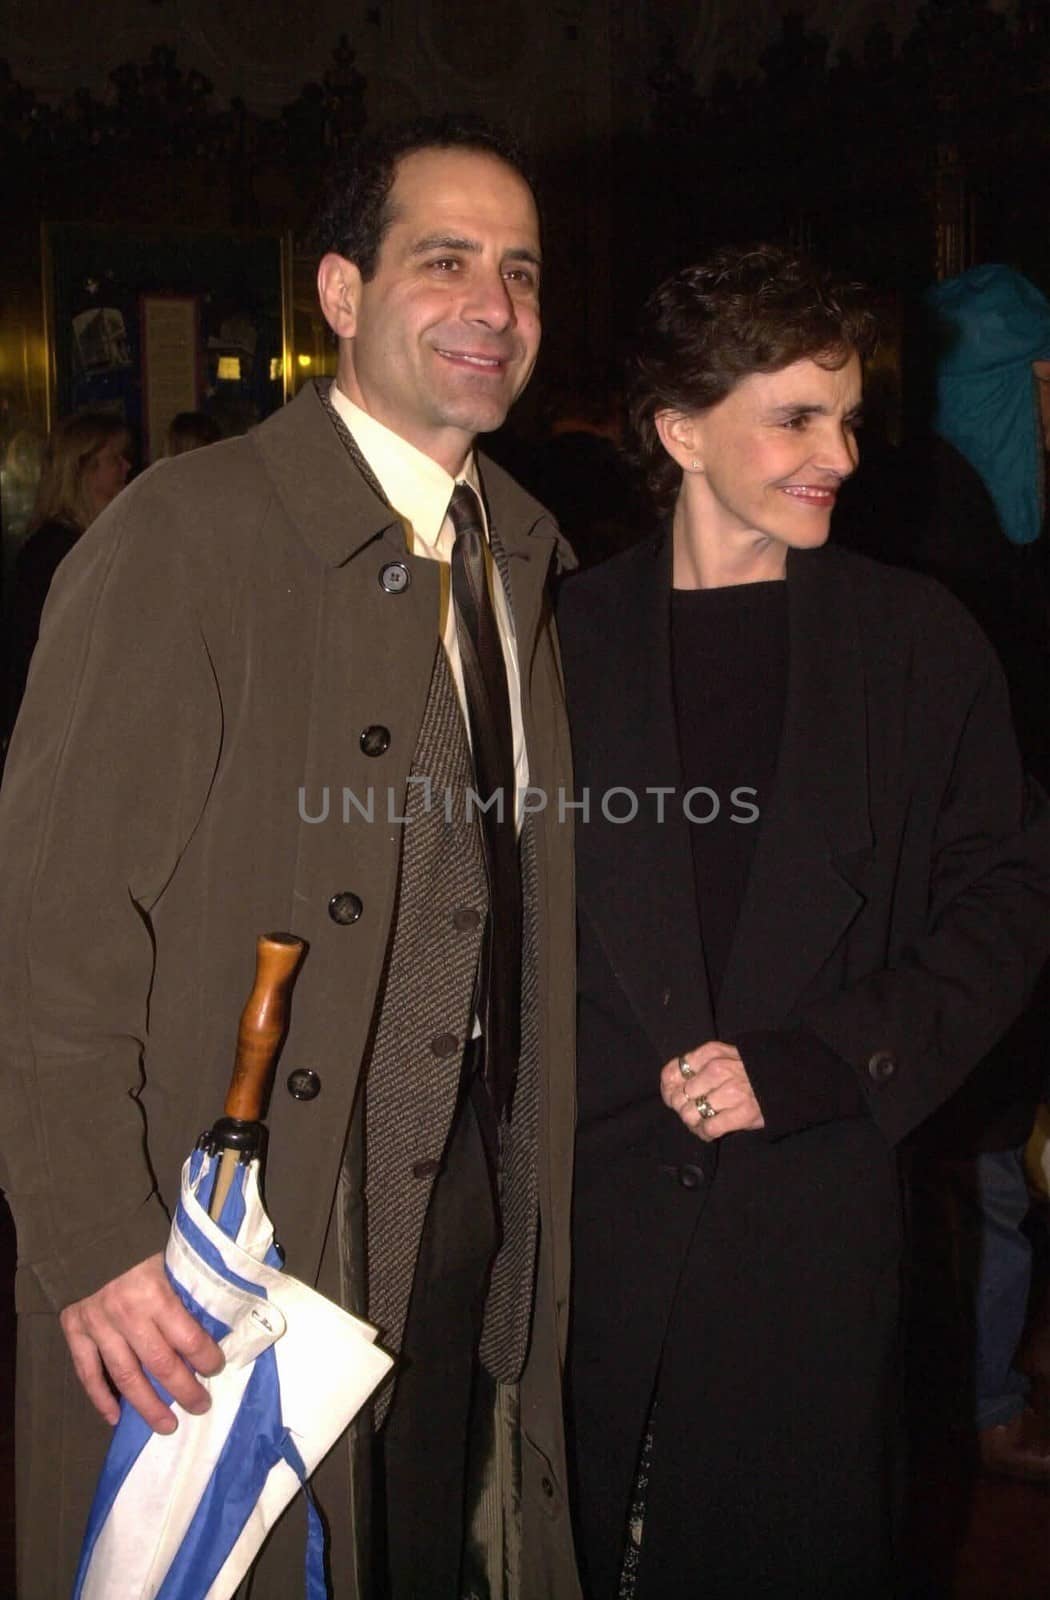 Tony Shaloub and wife Brooke Adams at the premiere of Dimension Film's "Reindeer Games" in Hollywood, 02-21-00